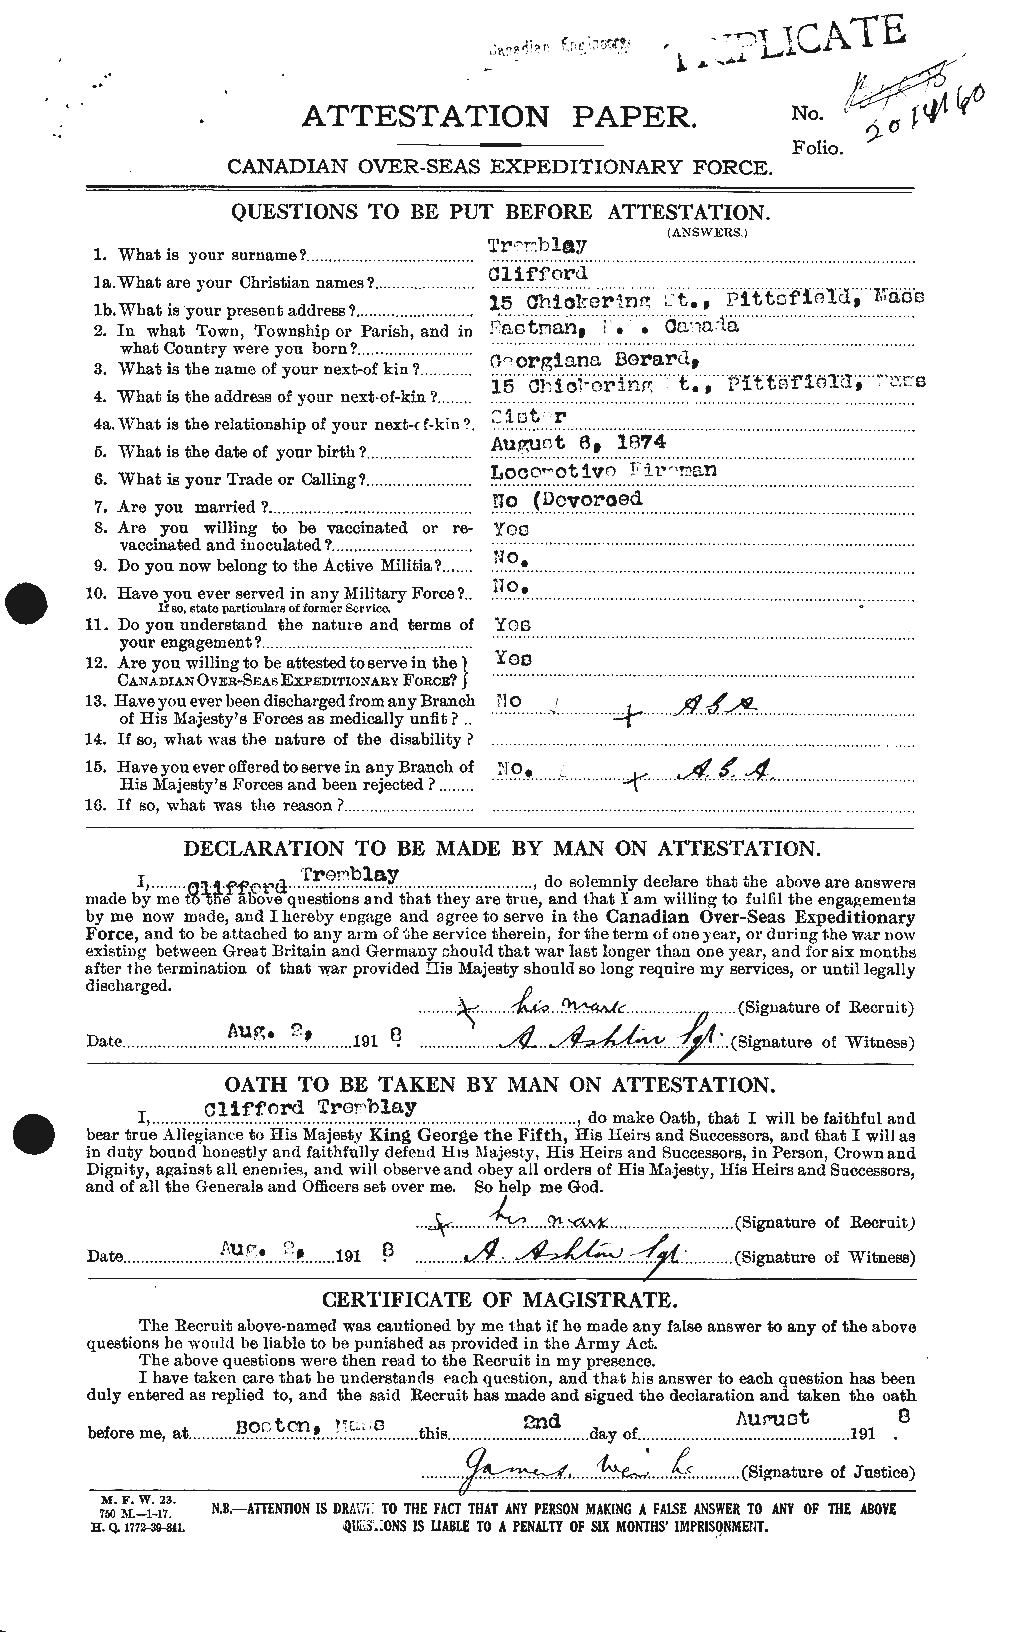 Personnel Records of the First World War - CEF 638987a